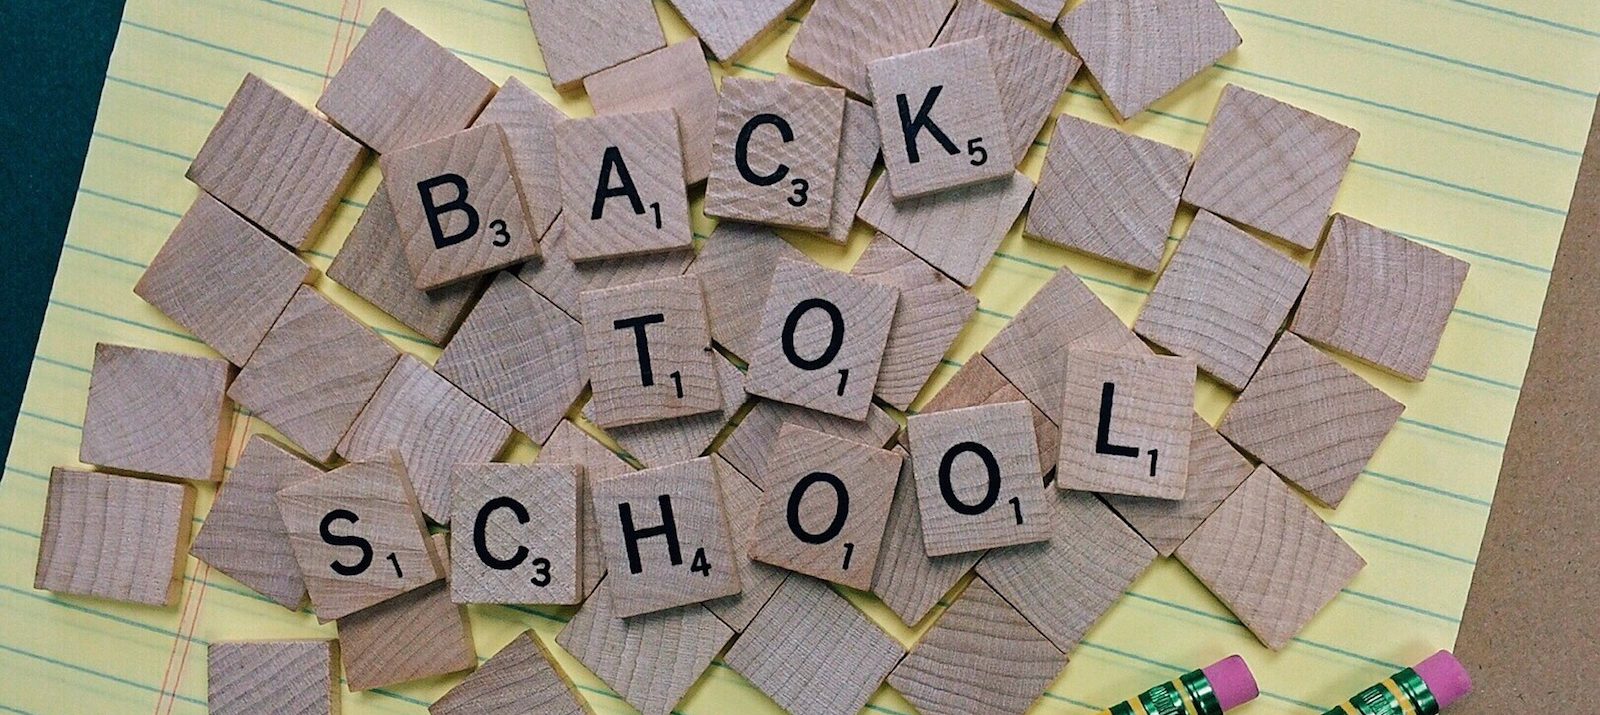 back to school organization tips and ideas scrabble tiles and 2 pencils atop a notepad